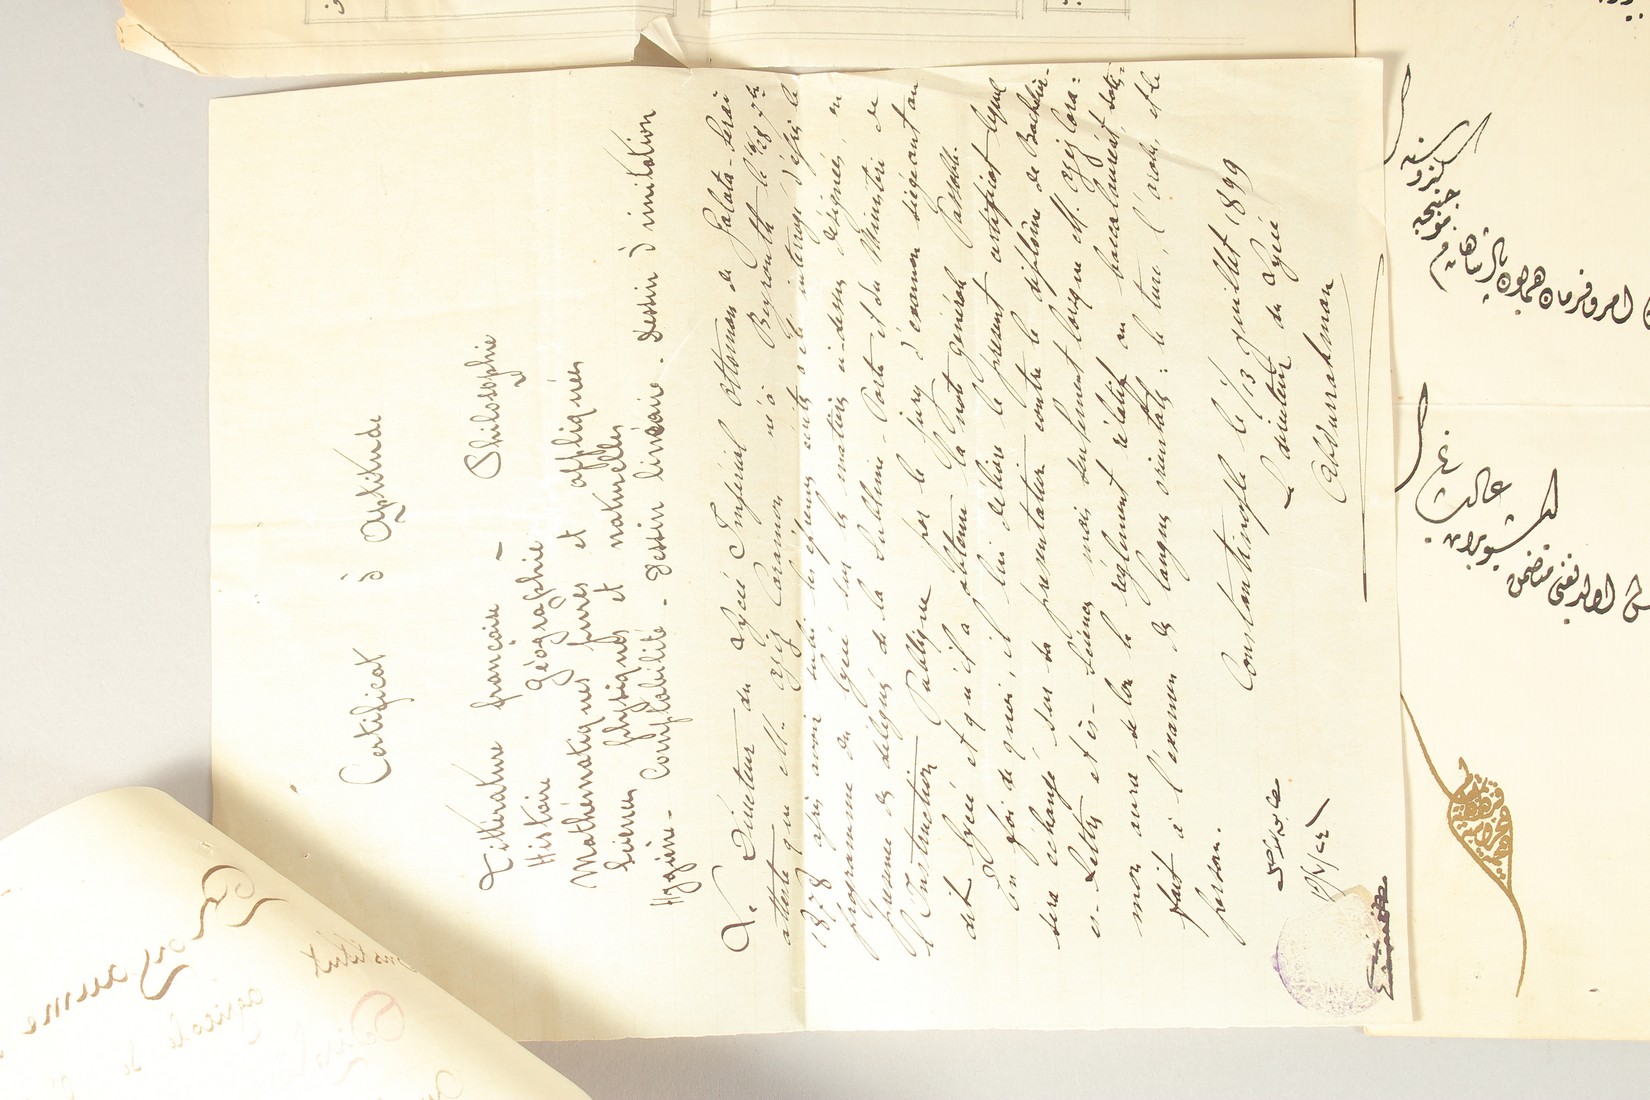 THREE OTTOMAN FIRMAN DOCUMENTS, two documents signed and dated, 19th century, (3). - Image 3 of 3